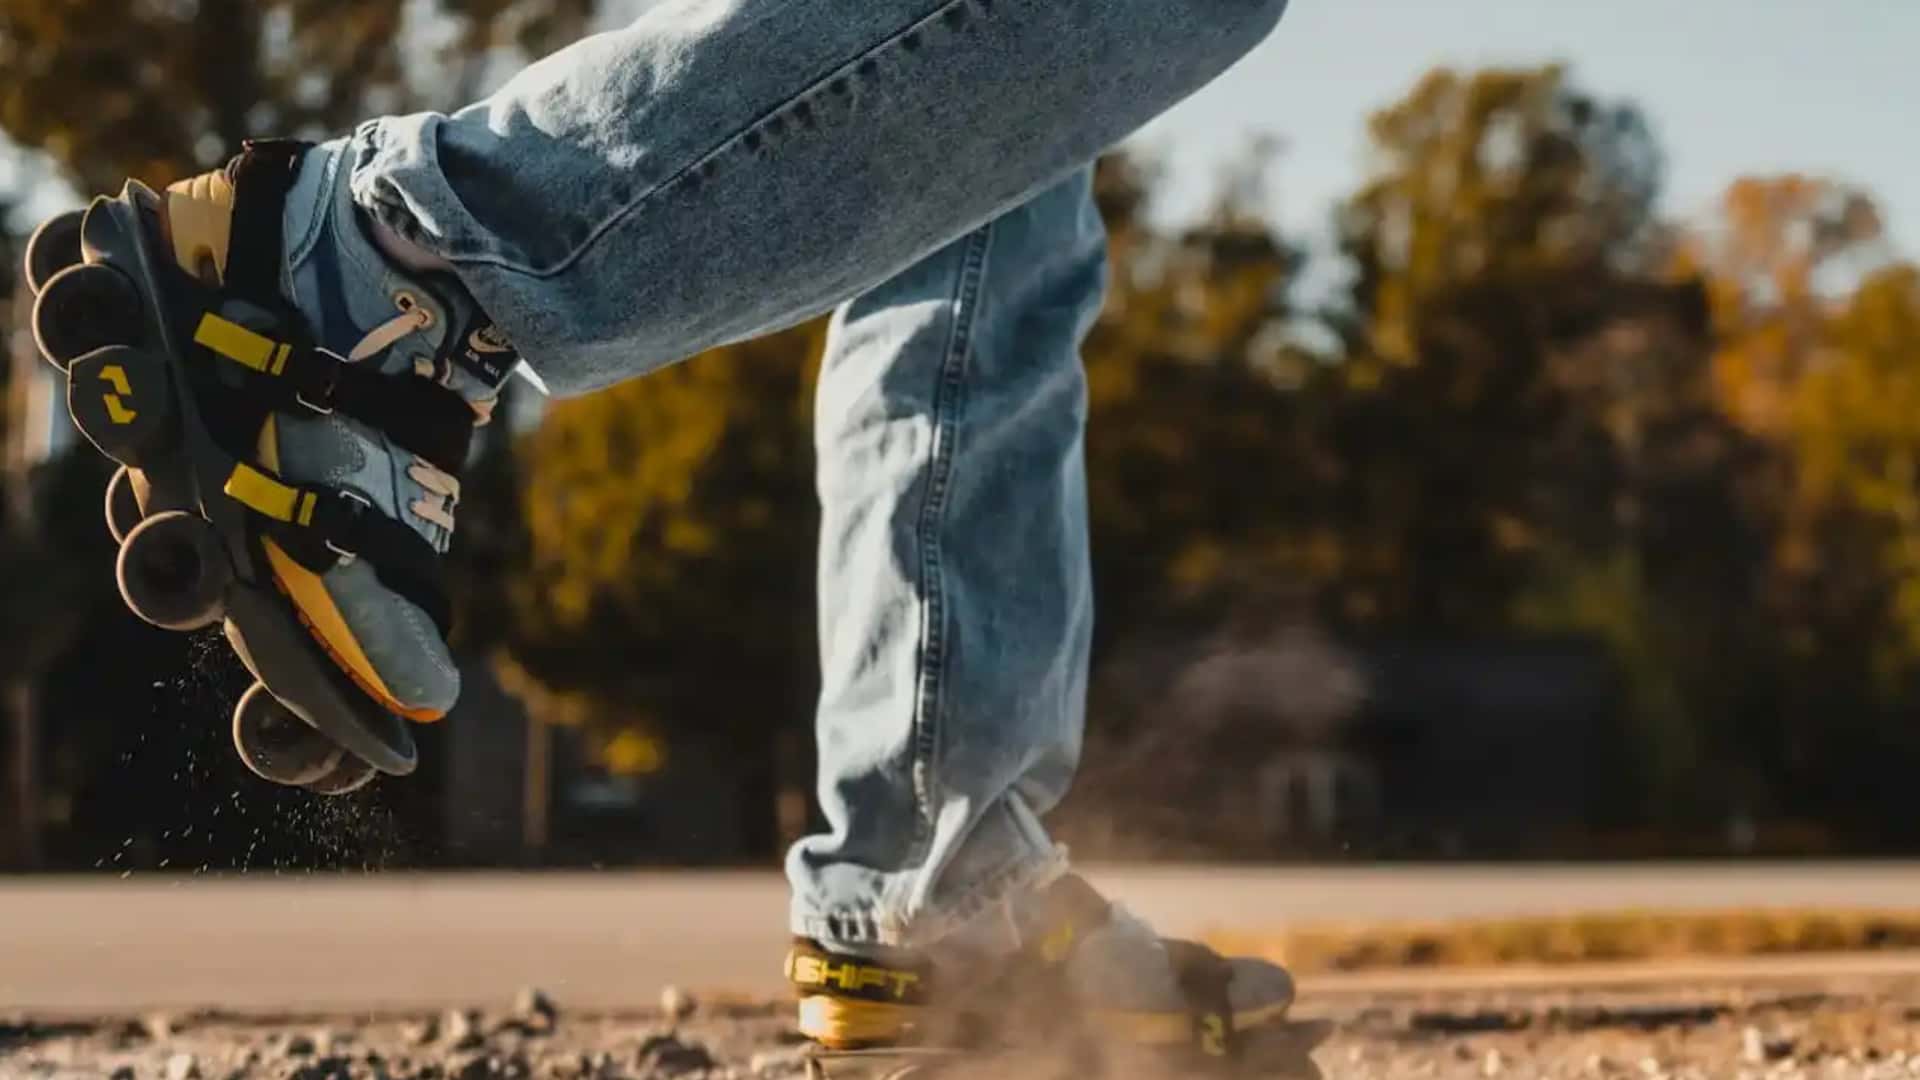 moonwalkers electric shoes want to supercharge your walking experience